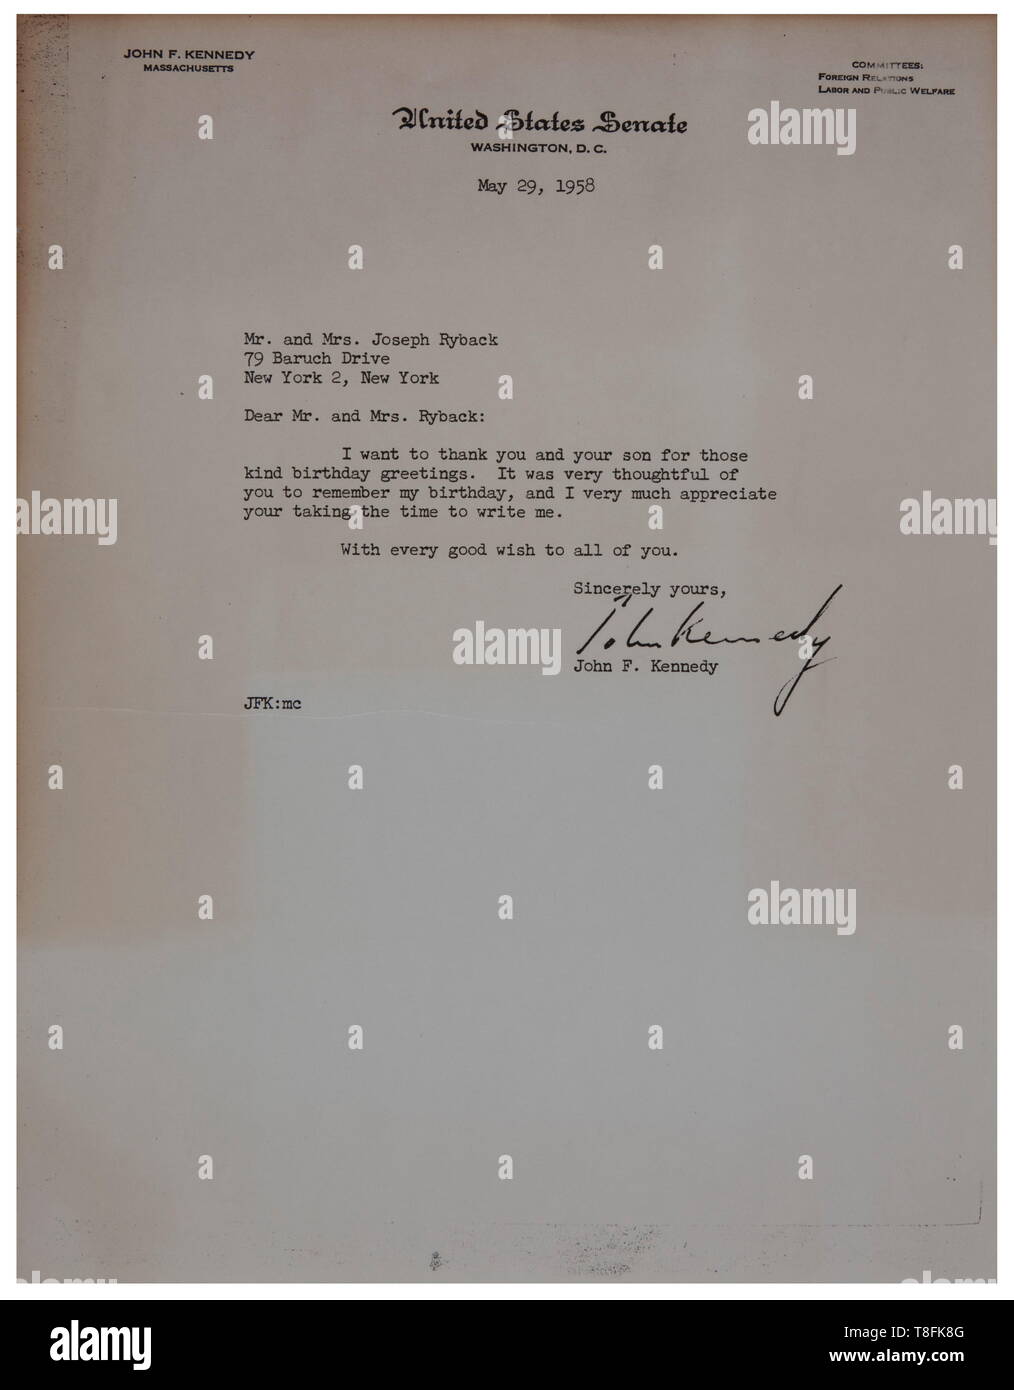 John F. Kennedy - letter dated 29 May, 1958 on U.S. Senate letterhead thanking a father/son for their birthday wishes. Letter dated 25 May, 1949 regarding problems in 'first district' sent by Arthur Jenner who was assistant scout executive to Kennedy as Senator, later signed by Kennedy as President. Copy of nuclear test ban treaty. USA - Los historic, historical, USA, United States of America, American, object, objects, stills, clipping, clippings, cut out, cut-out, cut-outs, 20th century, Additional-Rights-Clearance-Info-Not-Available Stock Photo